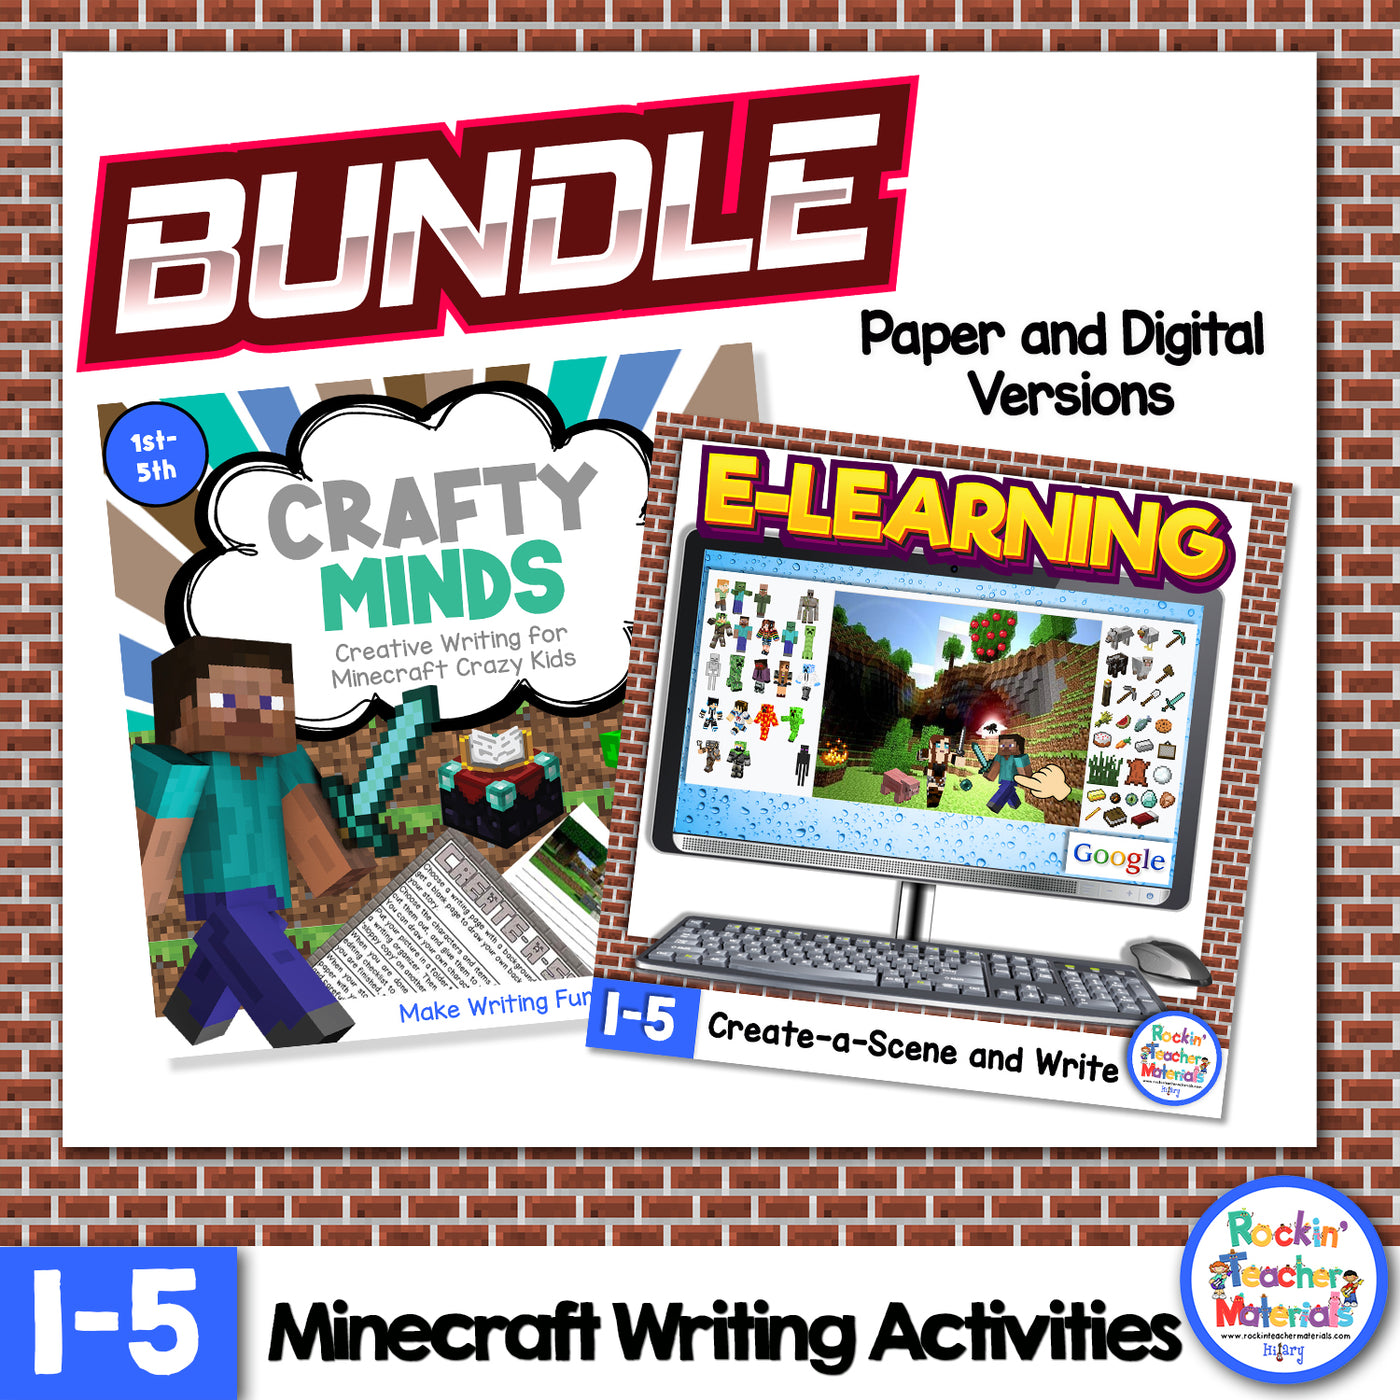 Minecraft Writing Create-a-Scene & Write - Digital & Printable Versions Combined